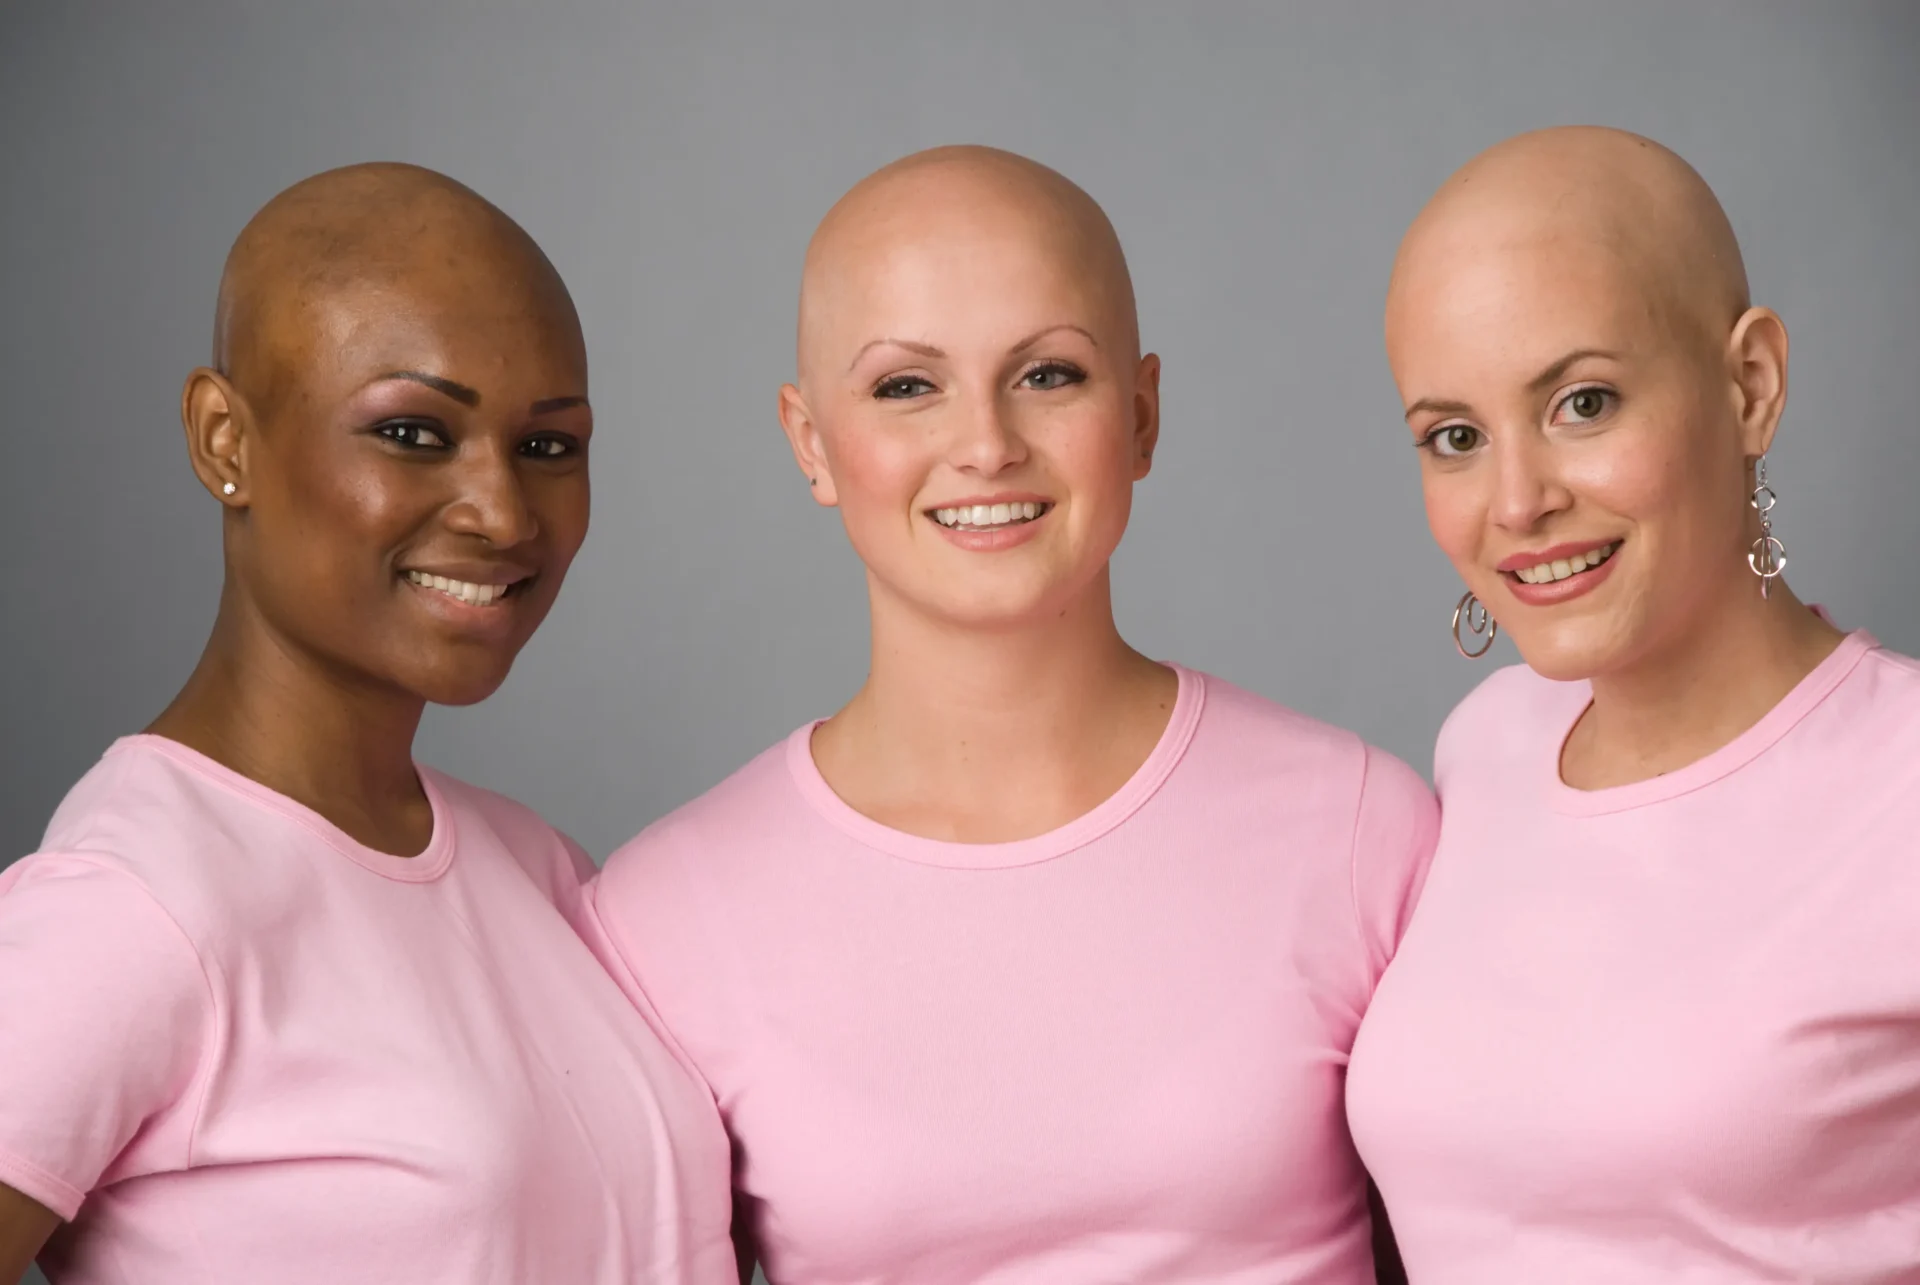 Three women standing together, wearing pink shirts with a gray background